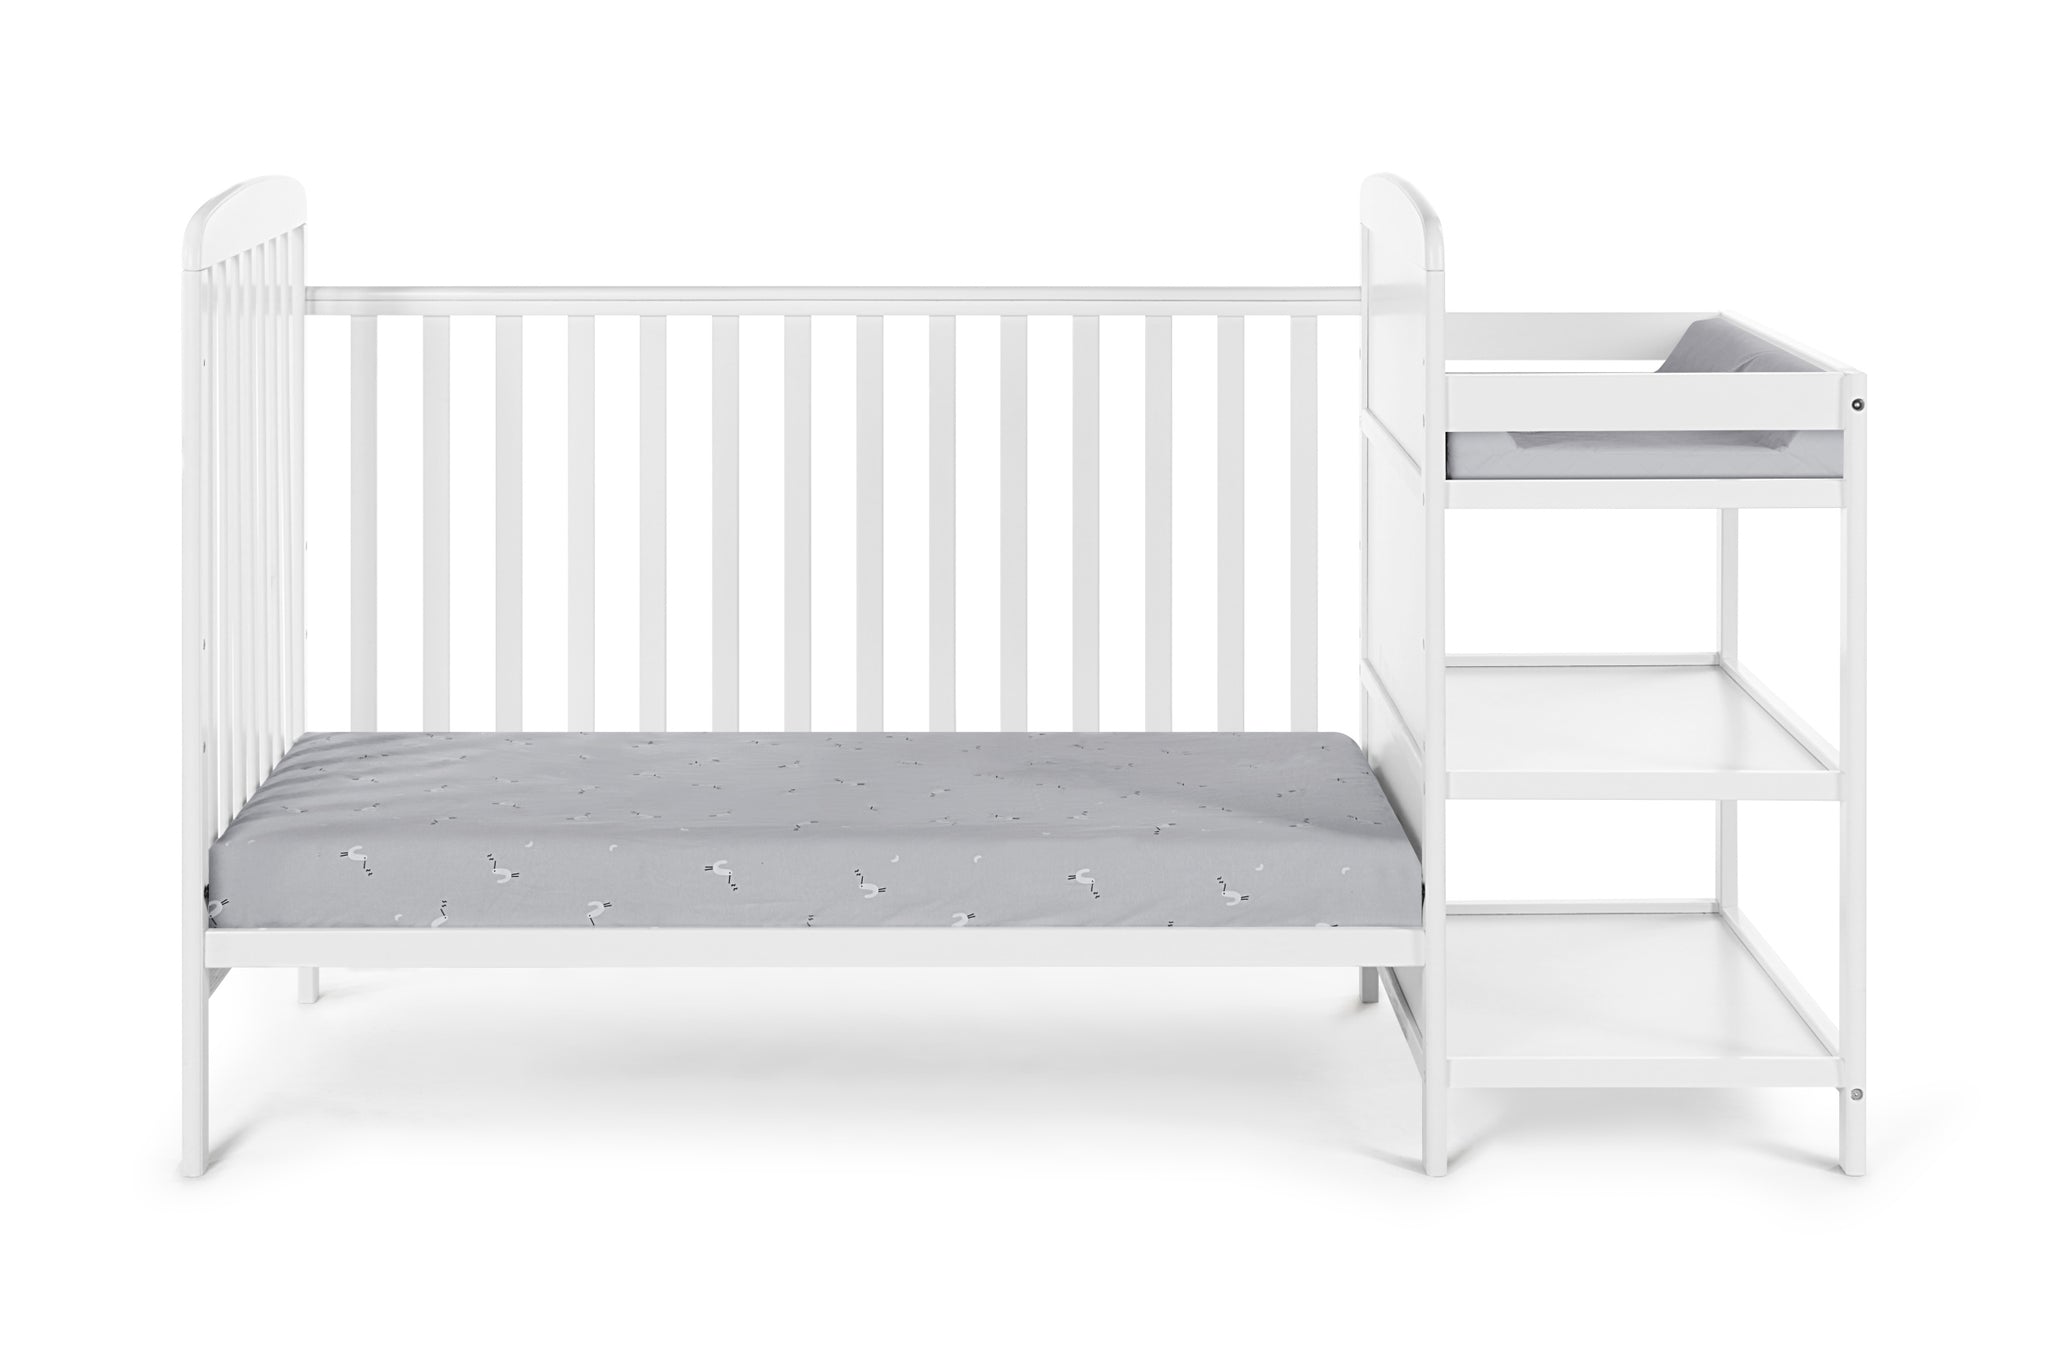 Ramsey 3 in 1 Convertible Crib and Changer Combo White white-solid wood